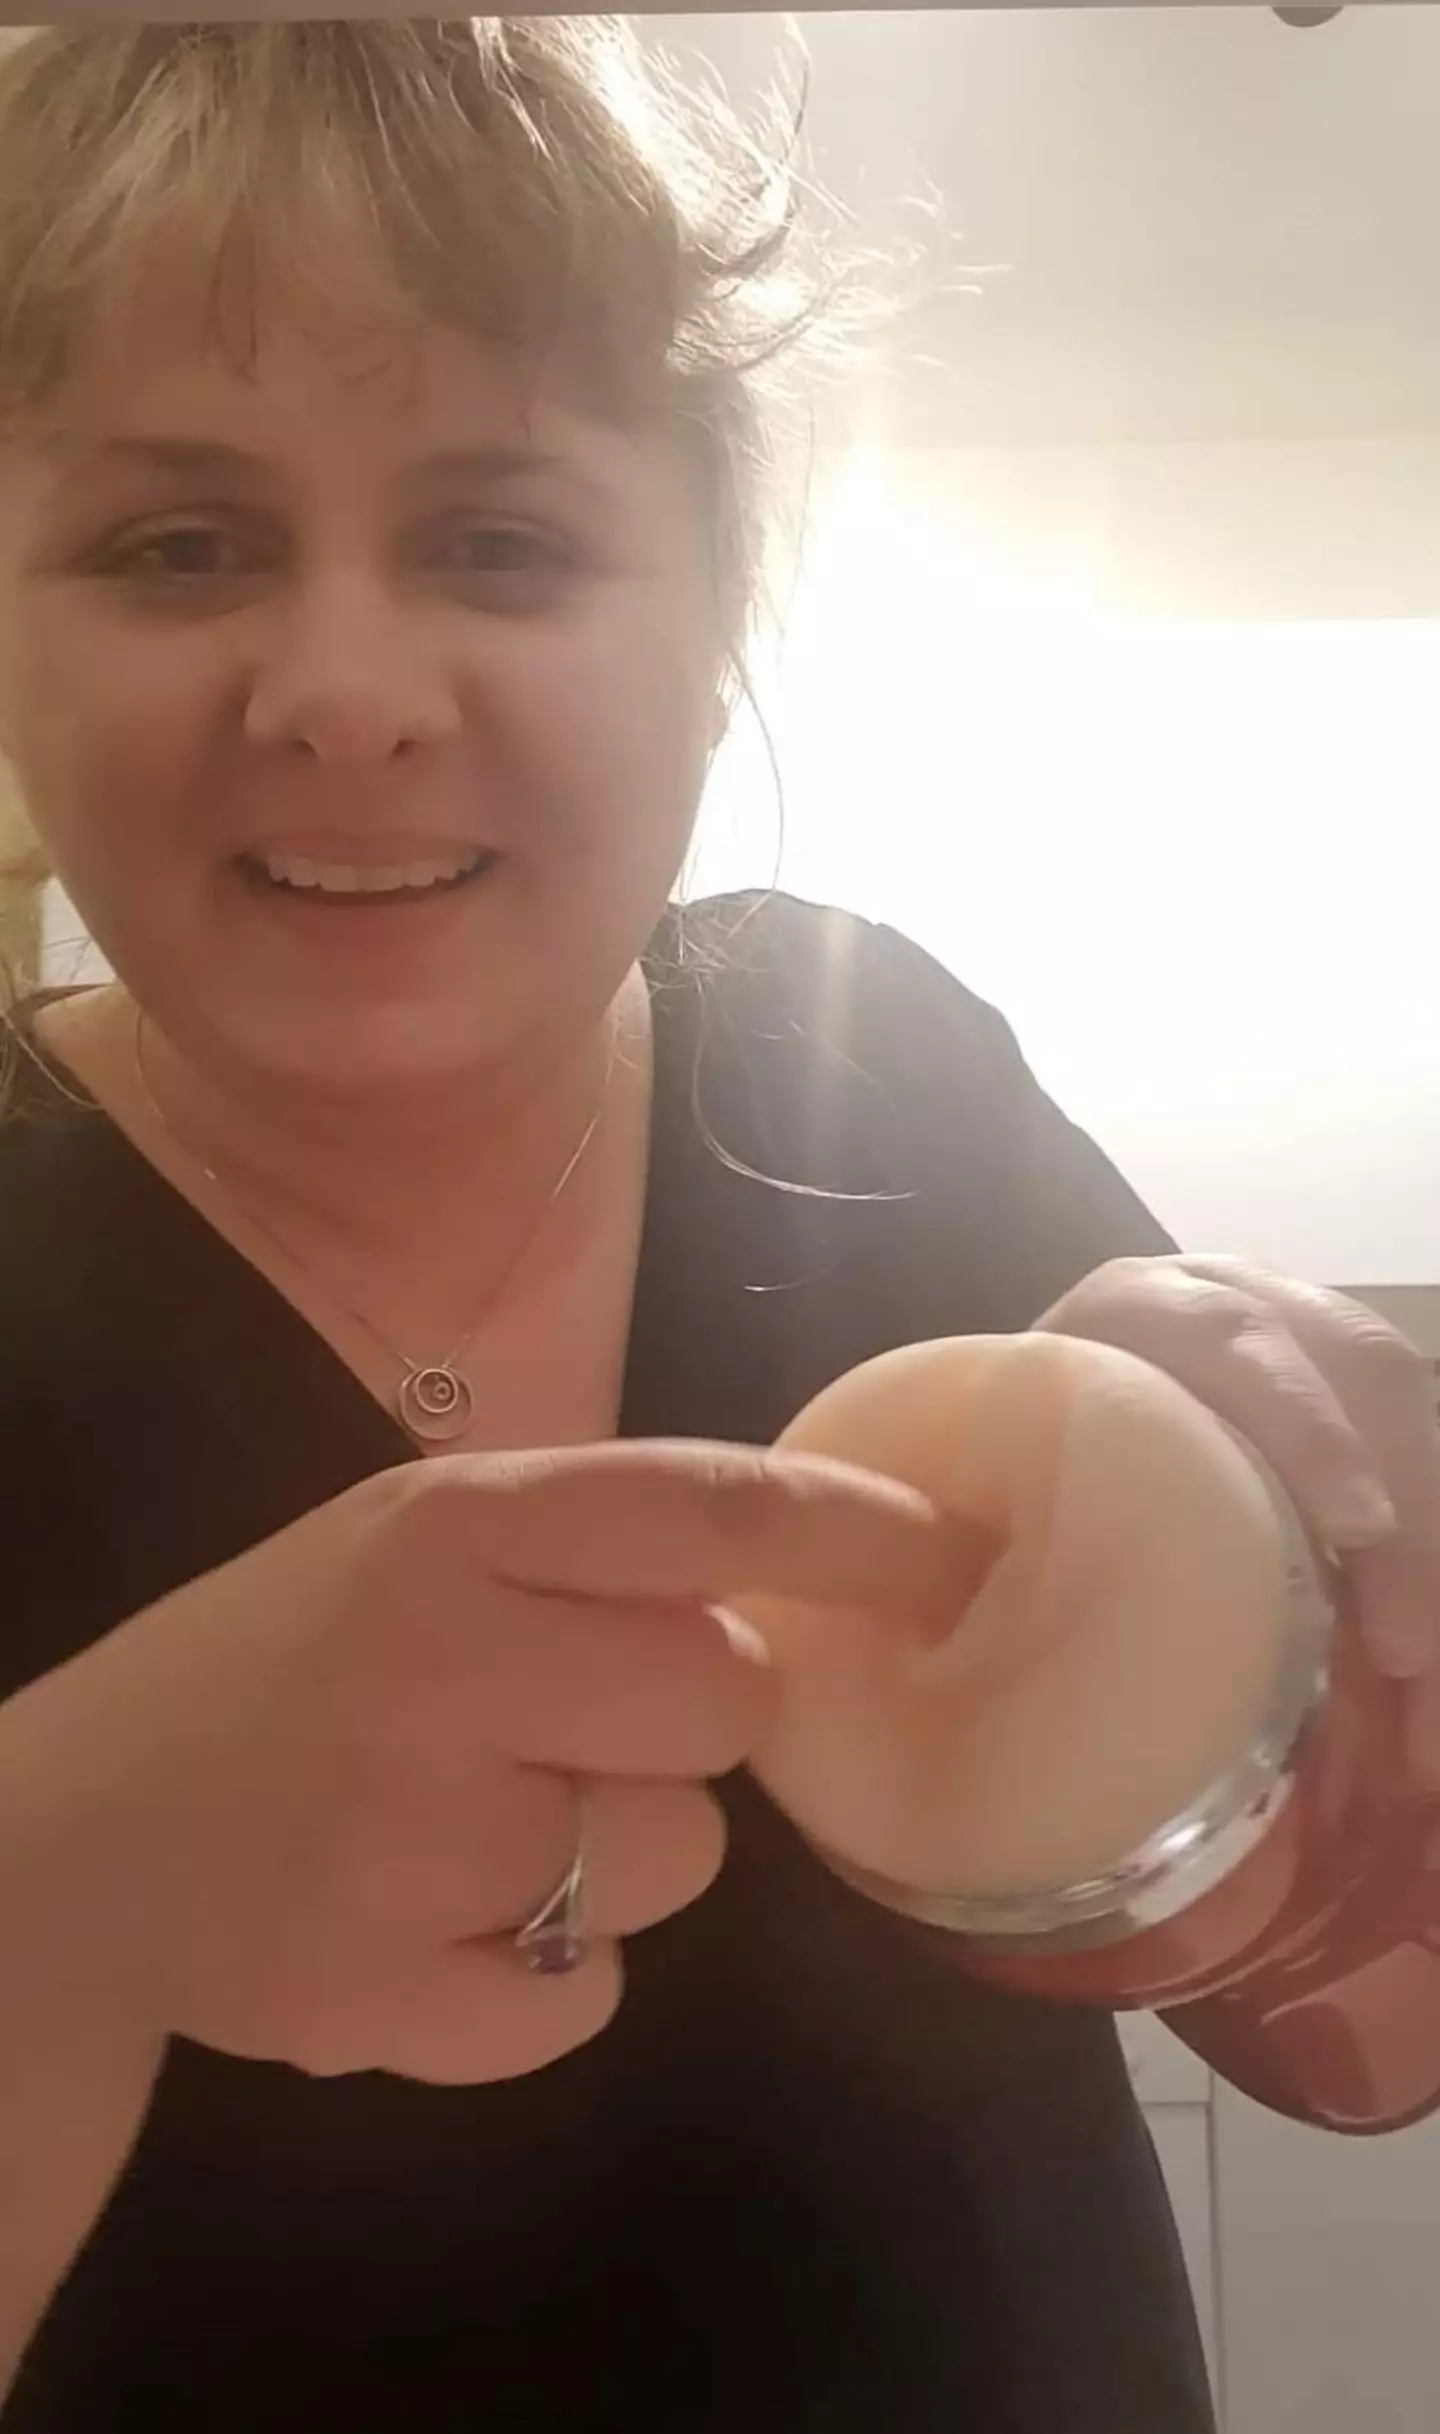 Kayley says the toy claims to make "real orgasm sounds" (